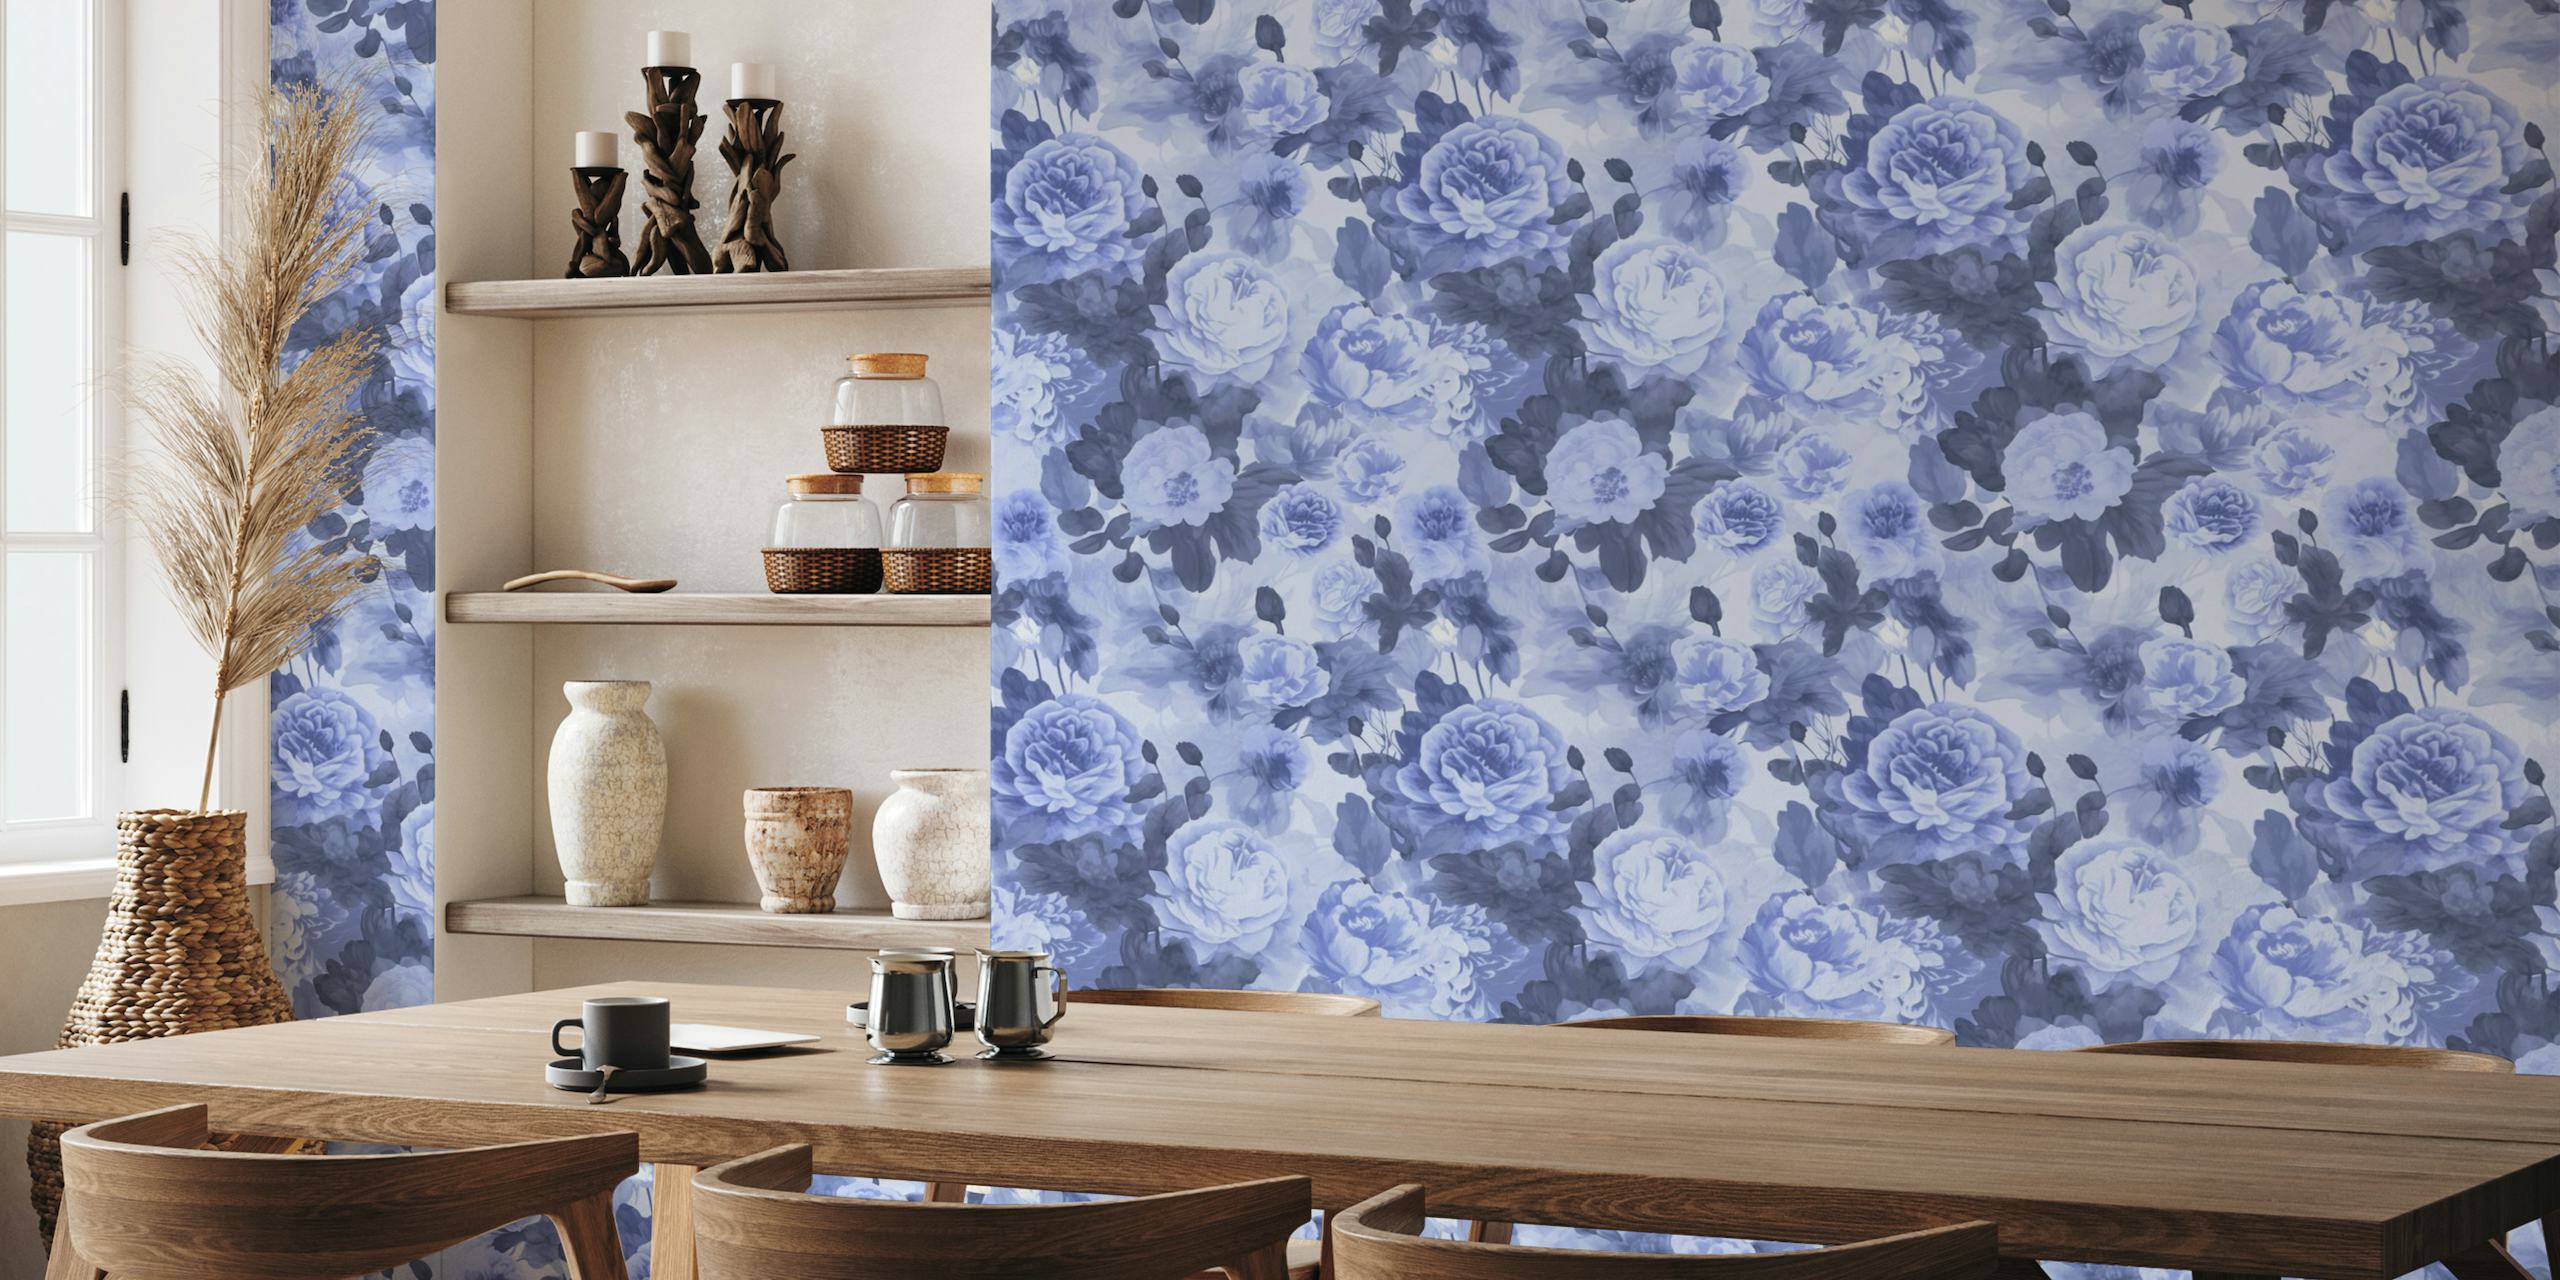 Baroque Roses Floral Nostalgia Design In Moody Colors Blue ταπετσαρία